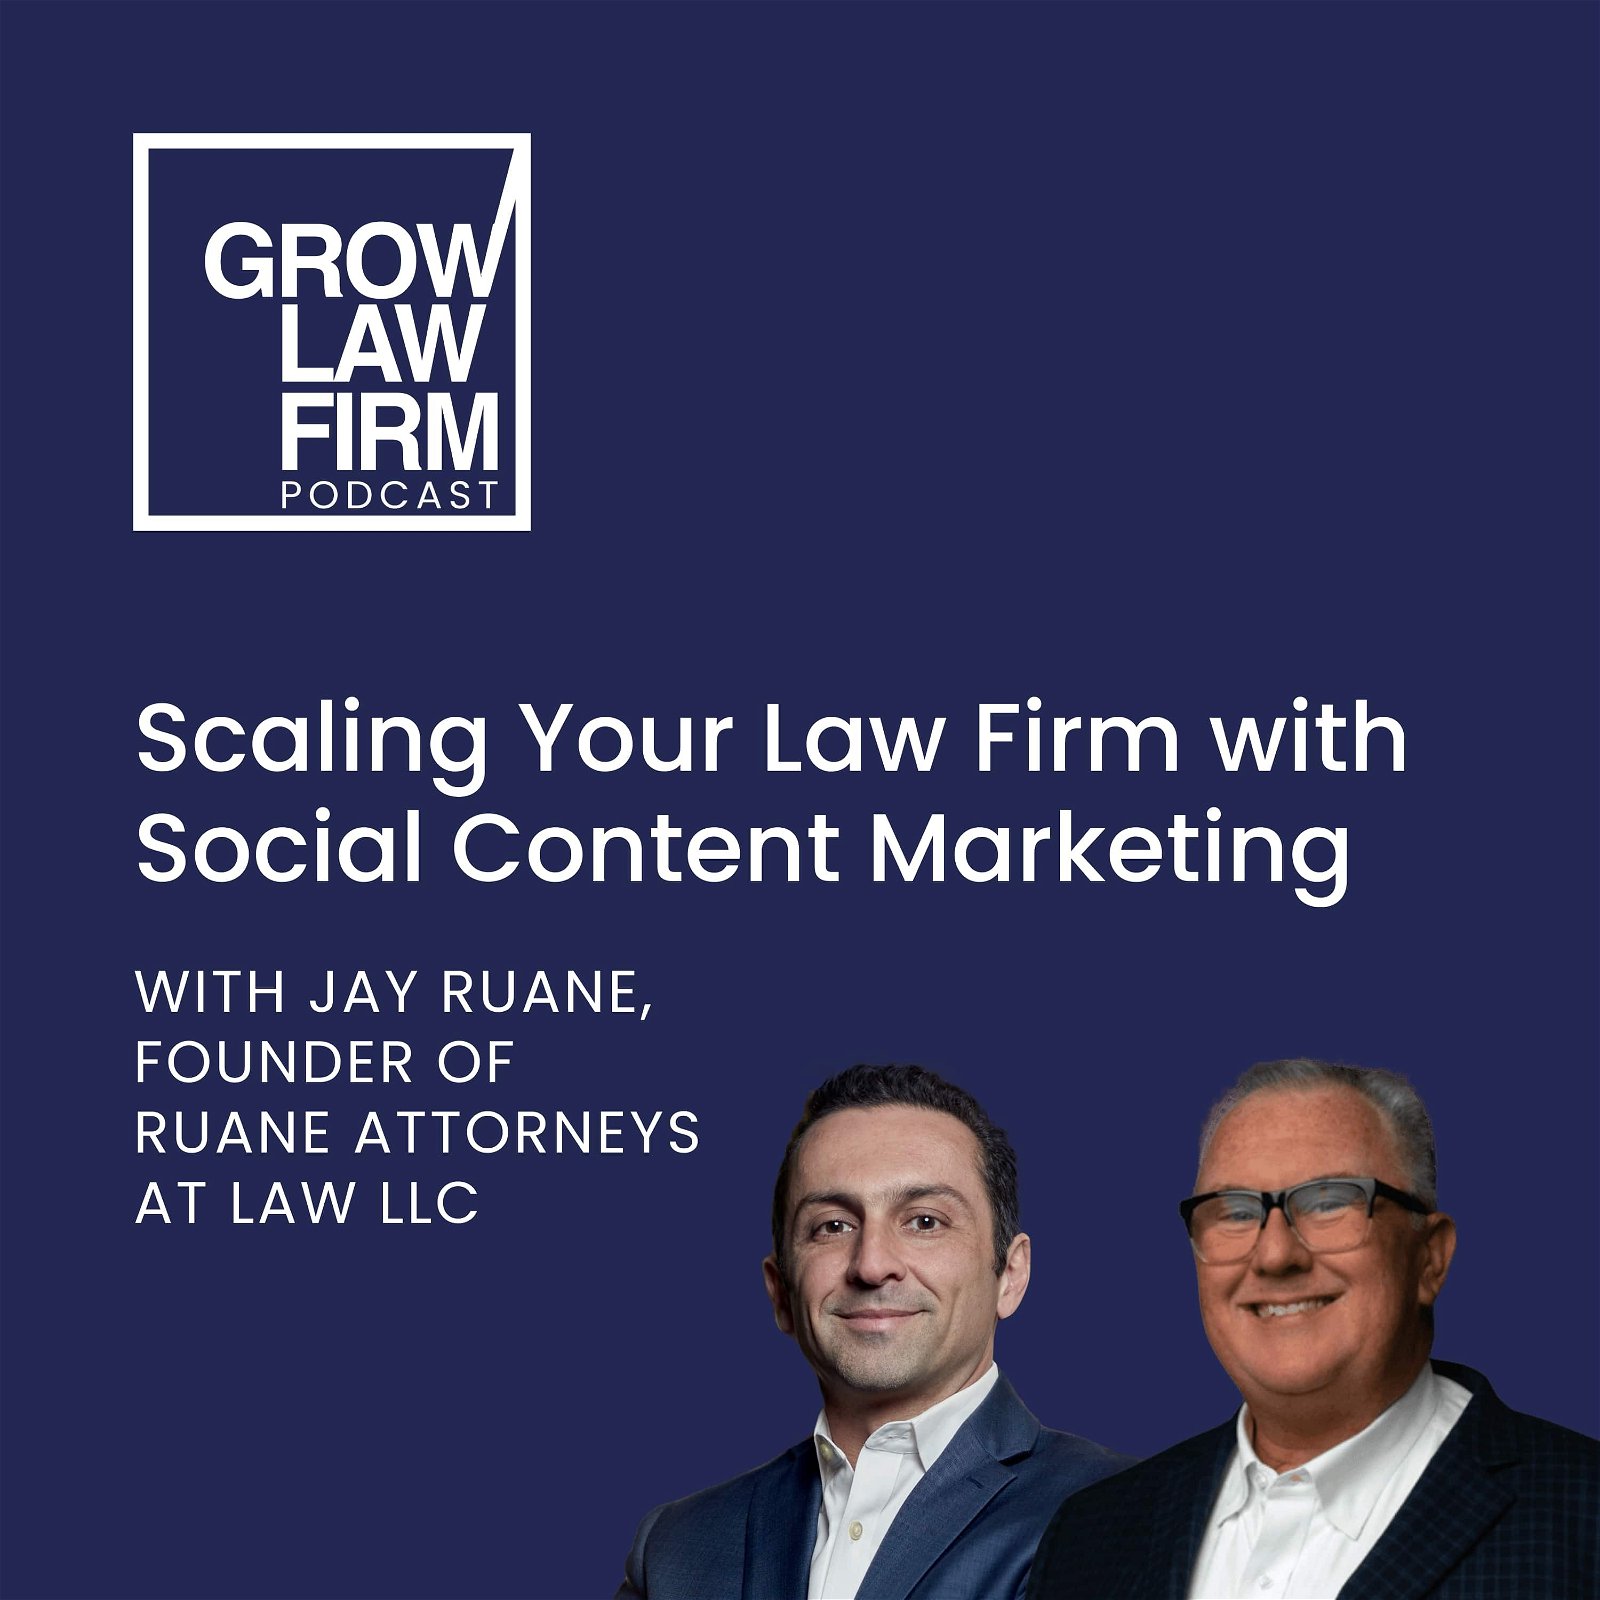 Scaling Your Law Firm with Social Content Marketing with Jay Ruane, Founder of Ruane Attorneys at Law LLC